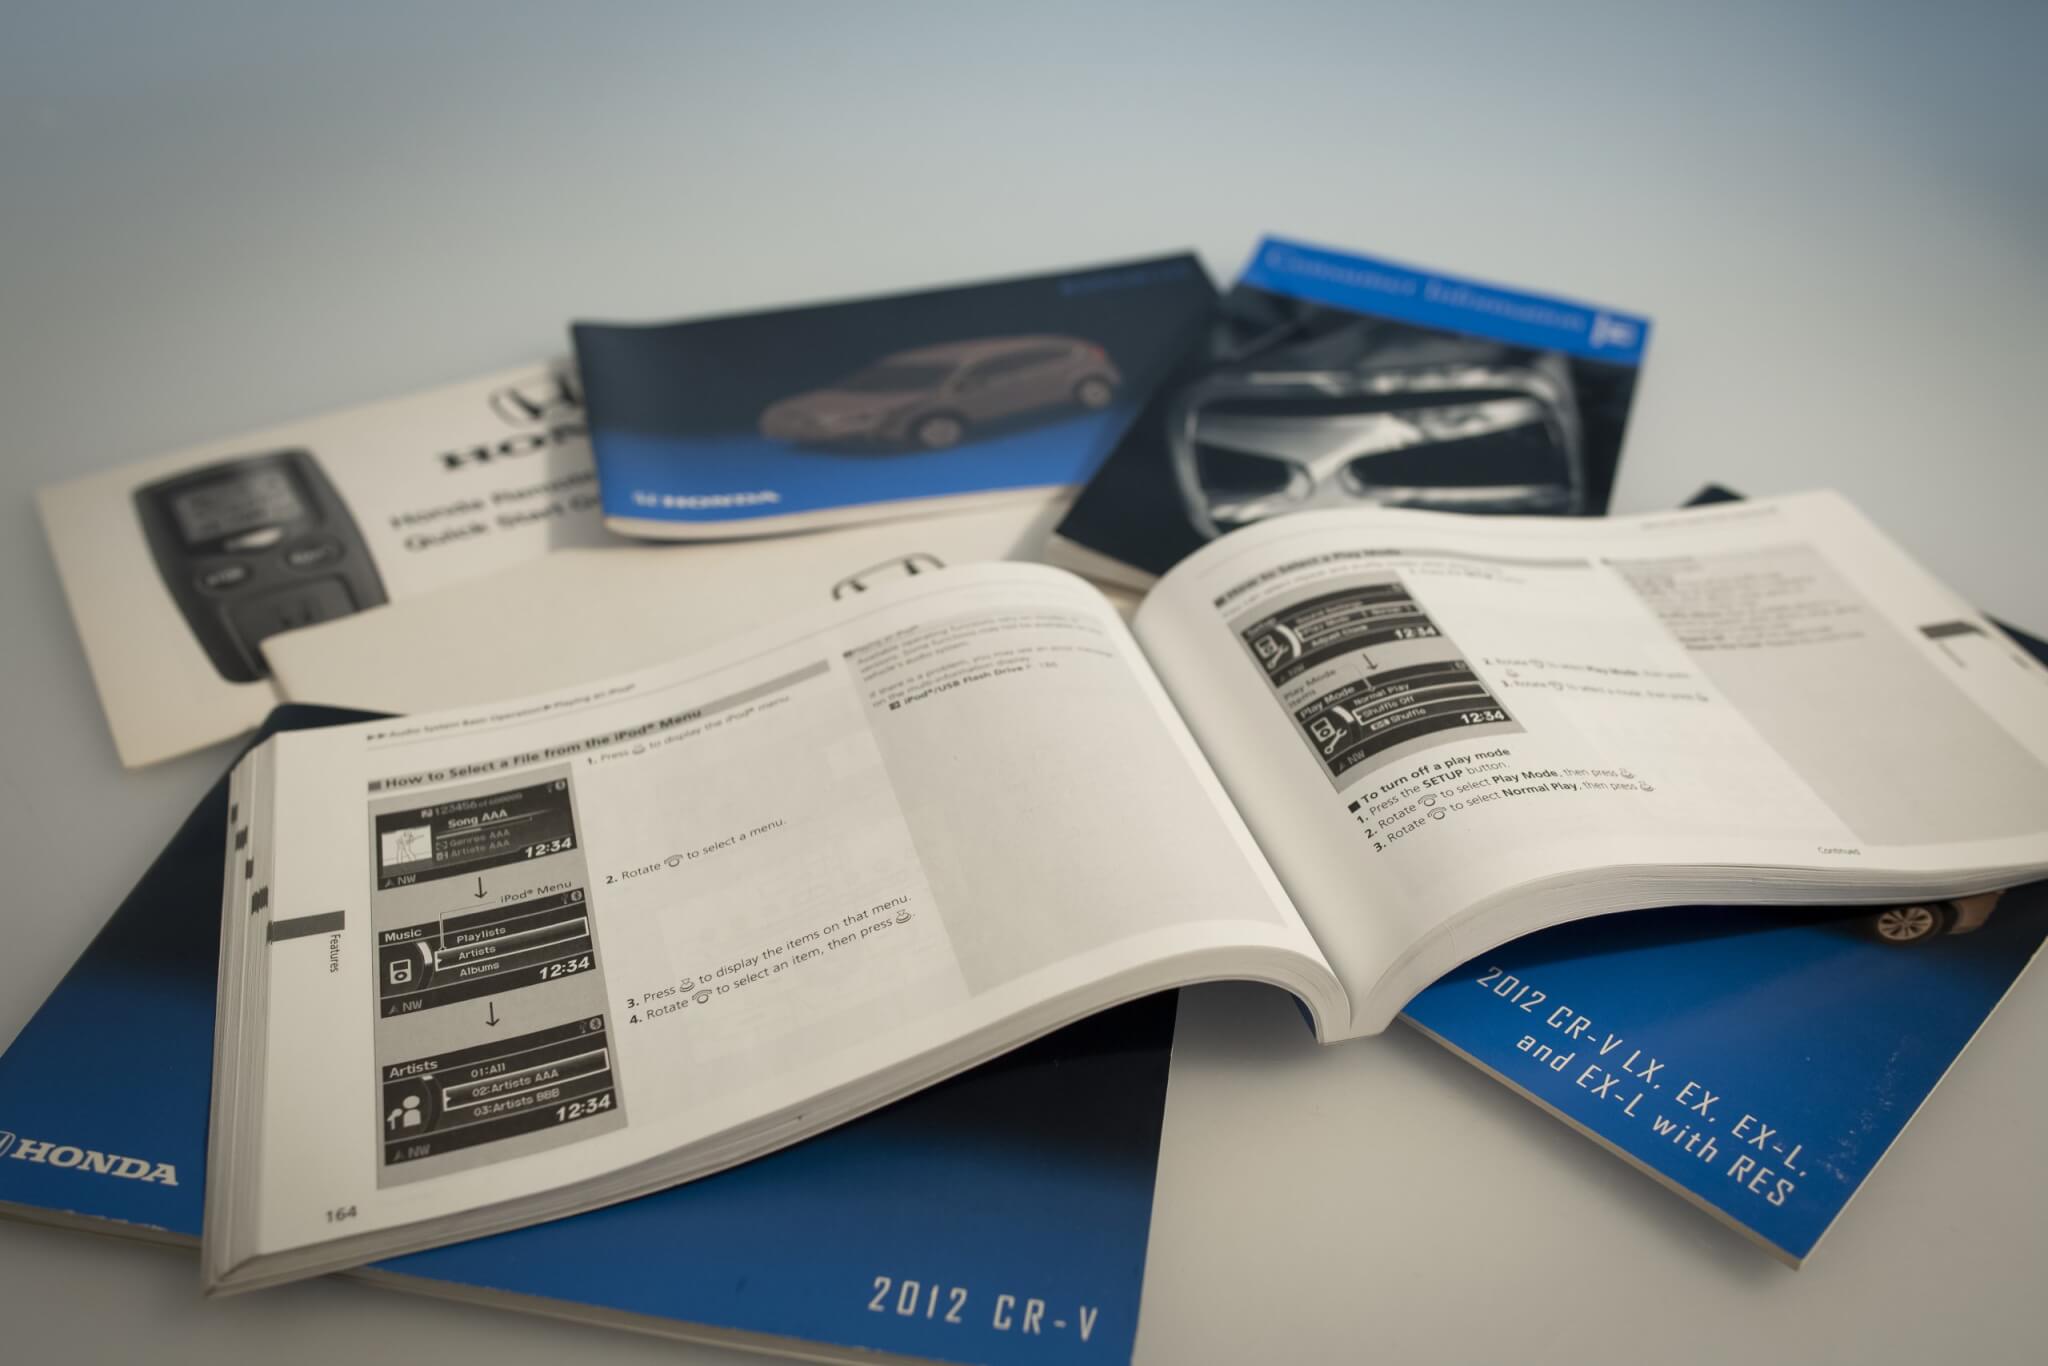 Photo of a Honda CR-V owner's manual and various related booklets